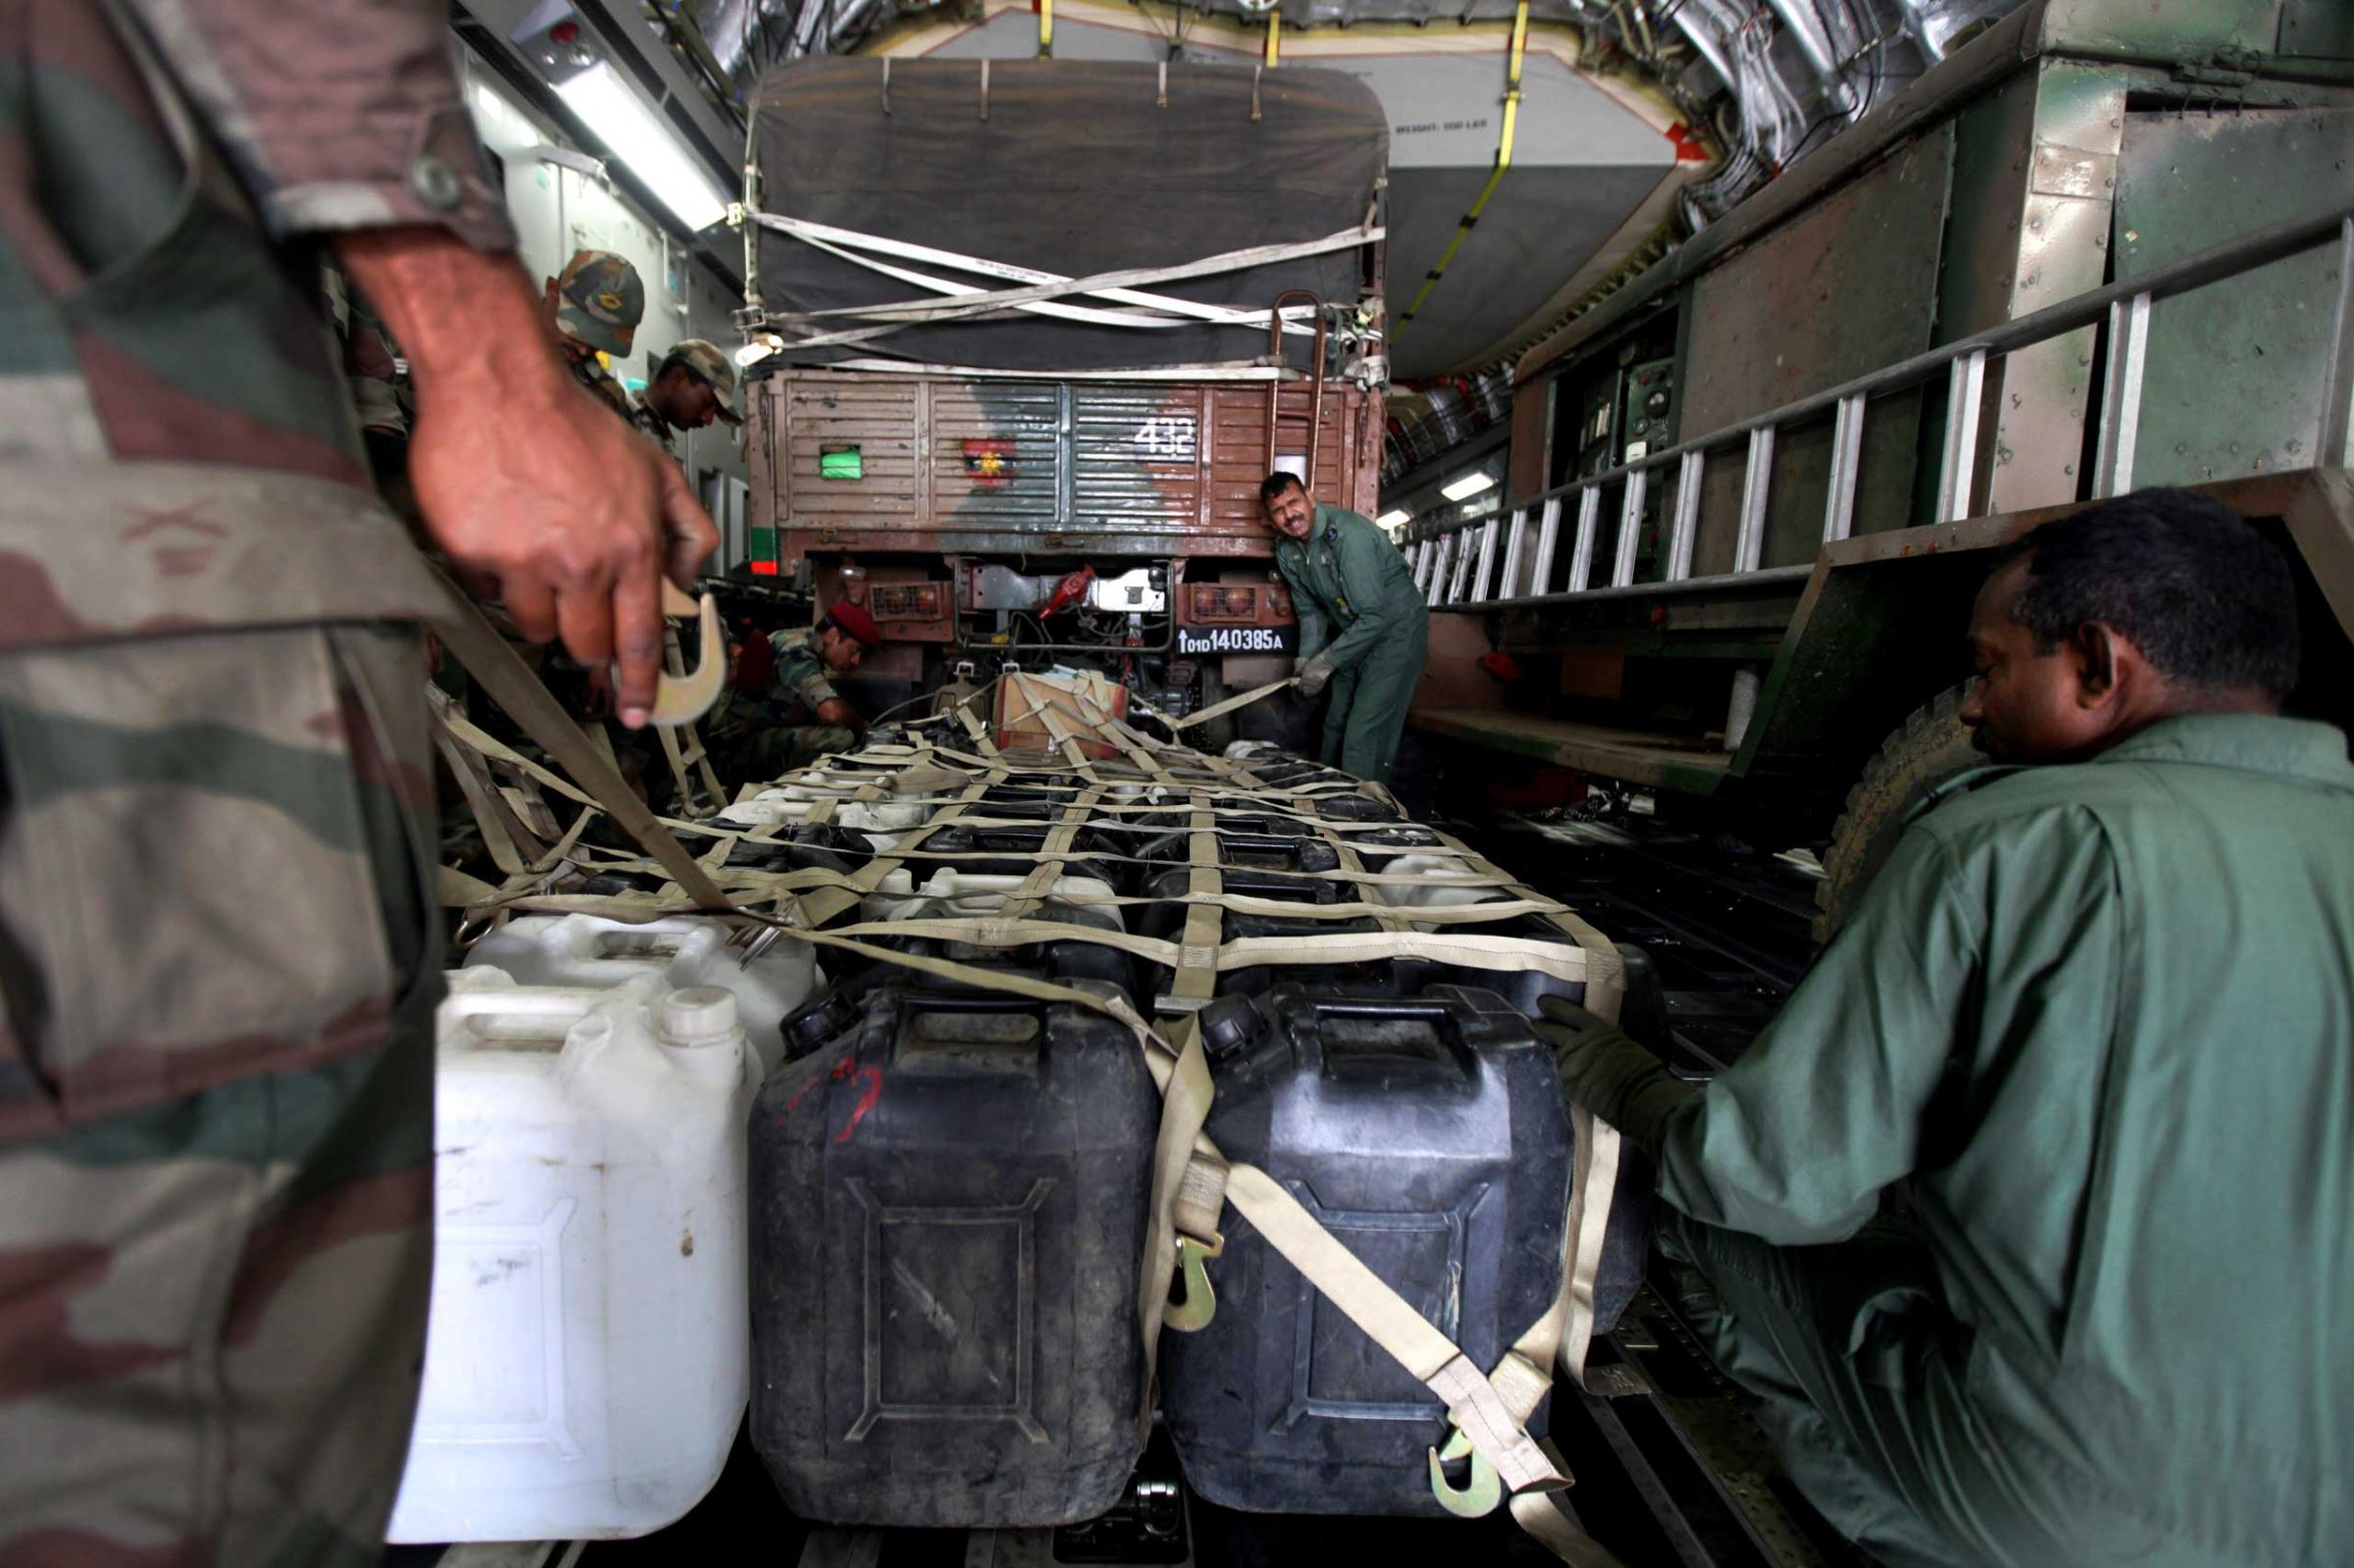 Plastic containers with drinking water are loaded into an Indian Air Force aircraft headed to Nepal, at a base near New Delhi on April 26, 2015.